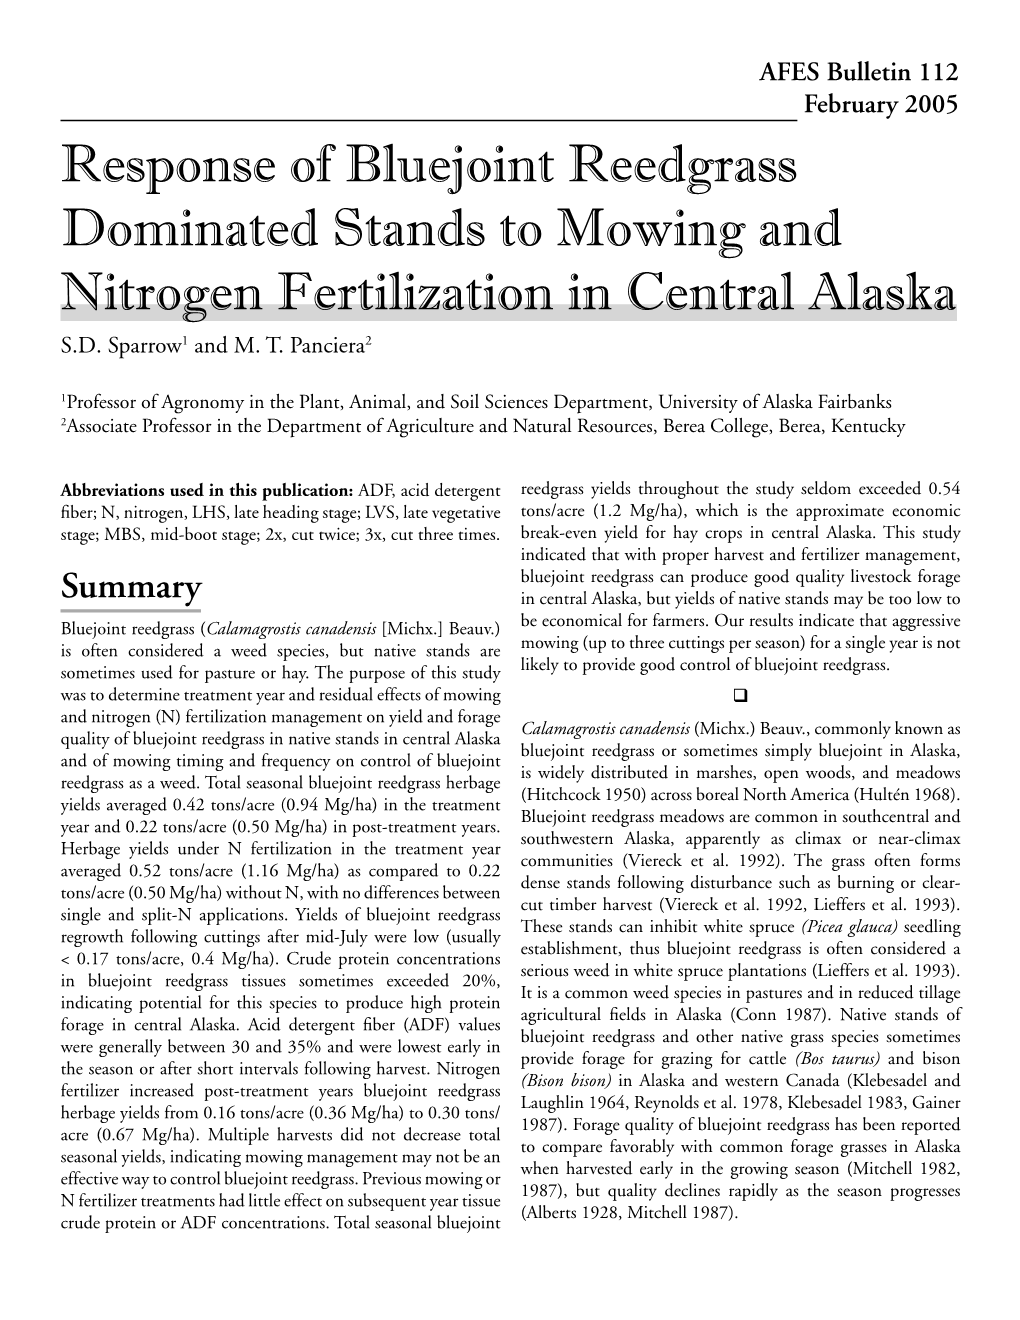 Response of Bluejoint Reedgrass Dominated Stands to Mowing and Nitrogen Fertilization in Central Alaska S.D